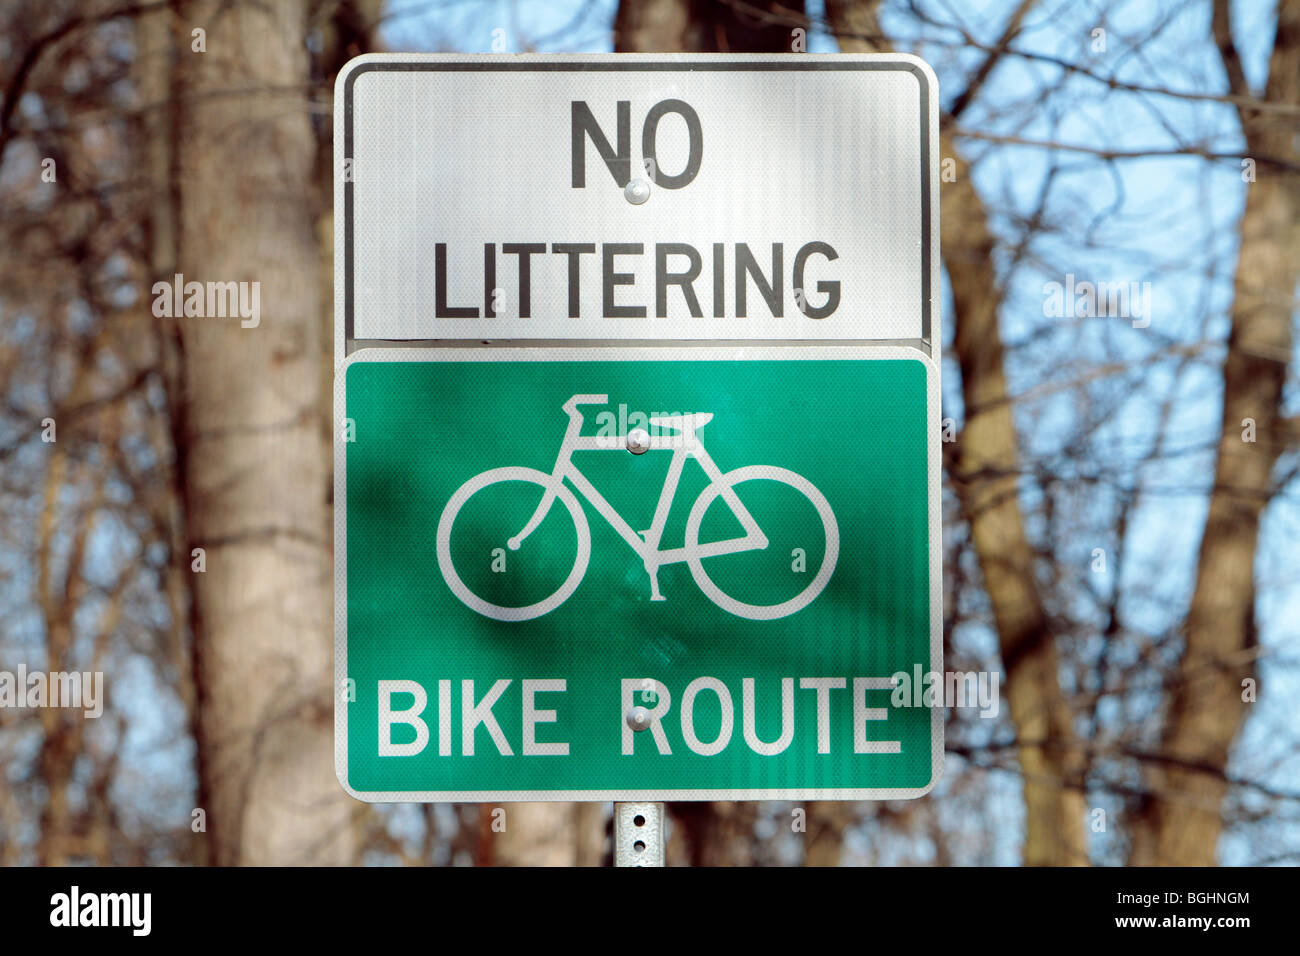 No Littering and bike route sign in the park. Stock Photo